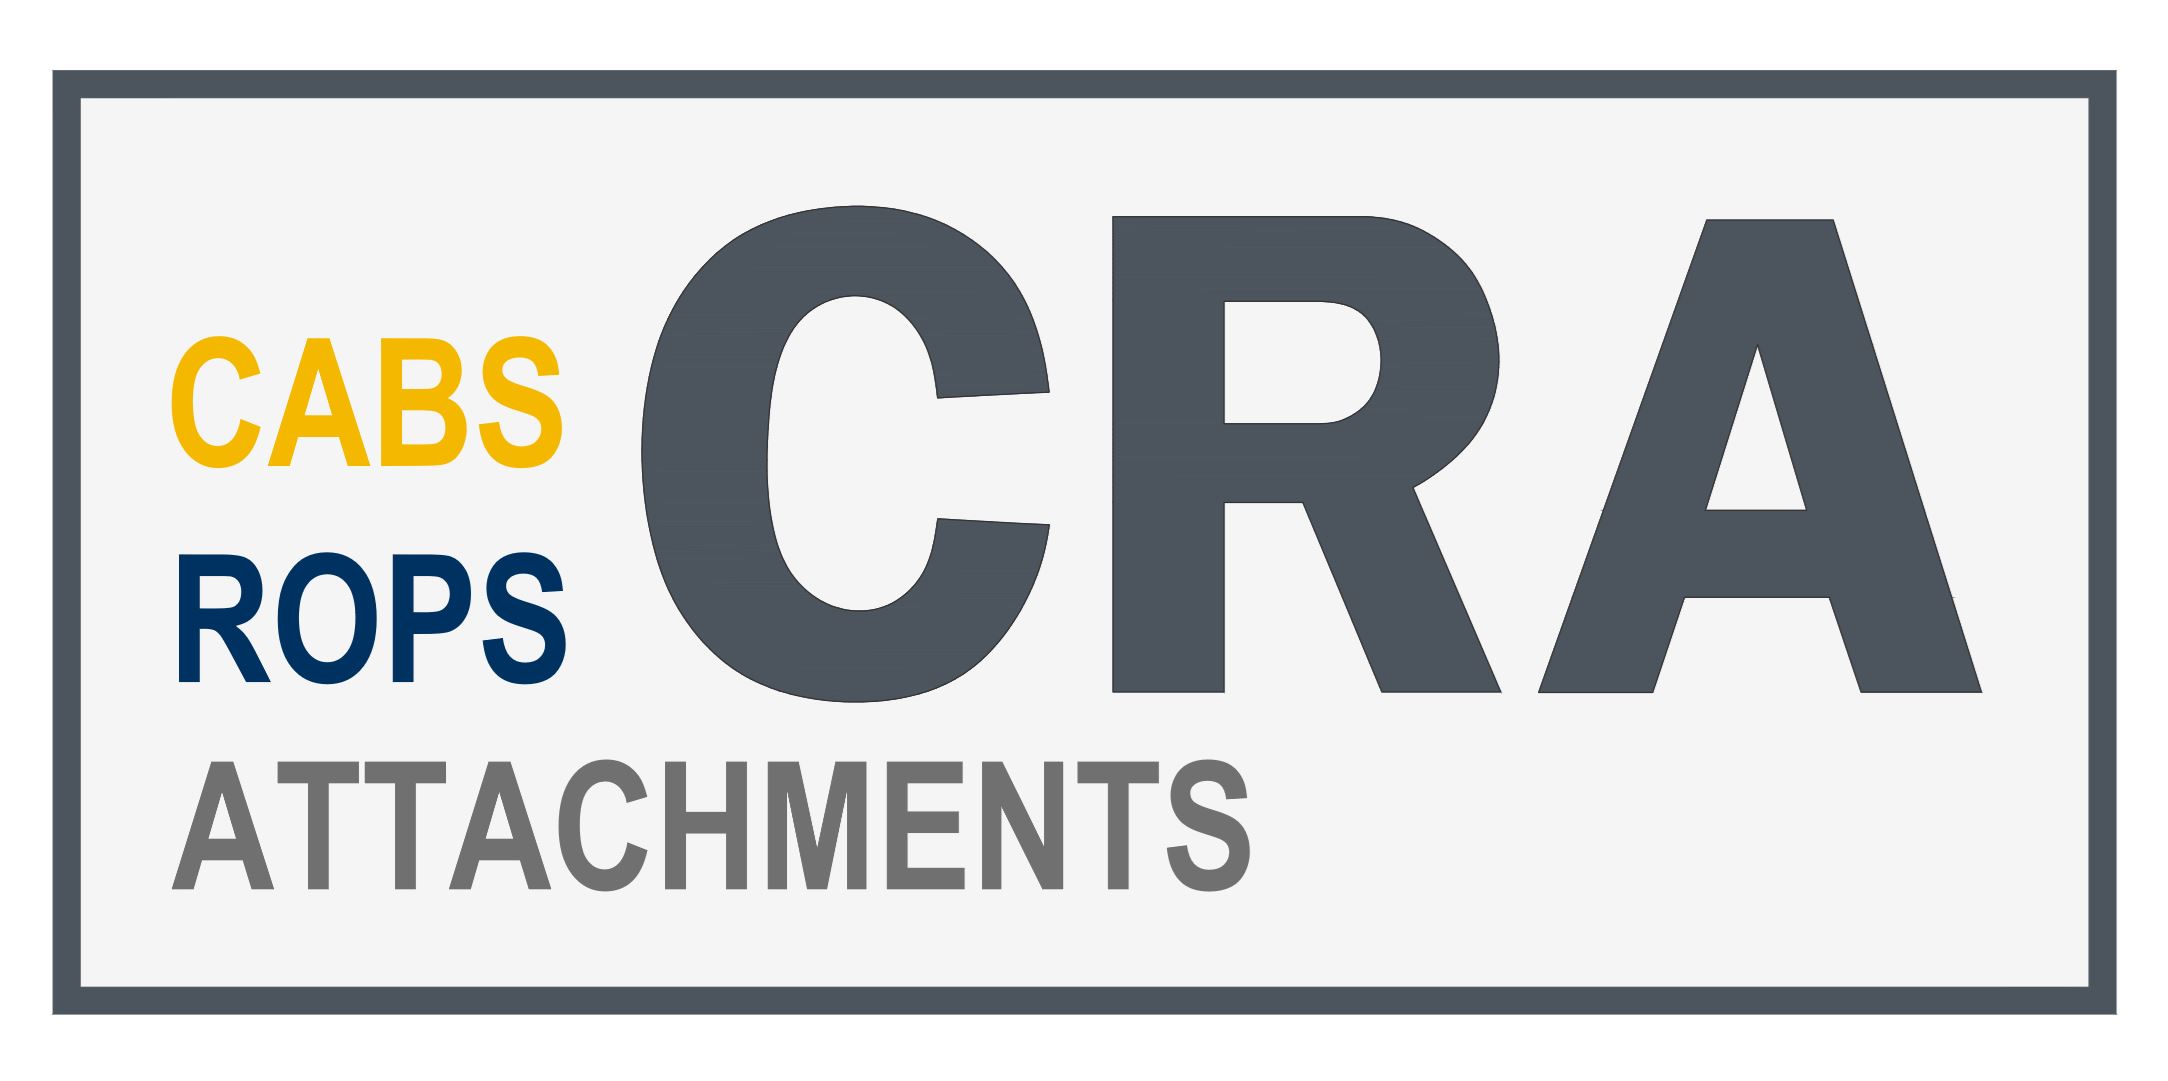 Cabs Rops & Attachments (CRA) – Metal Fabrication and Finishing Manufacturer